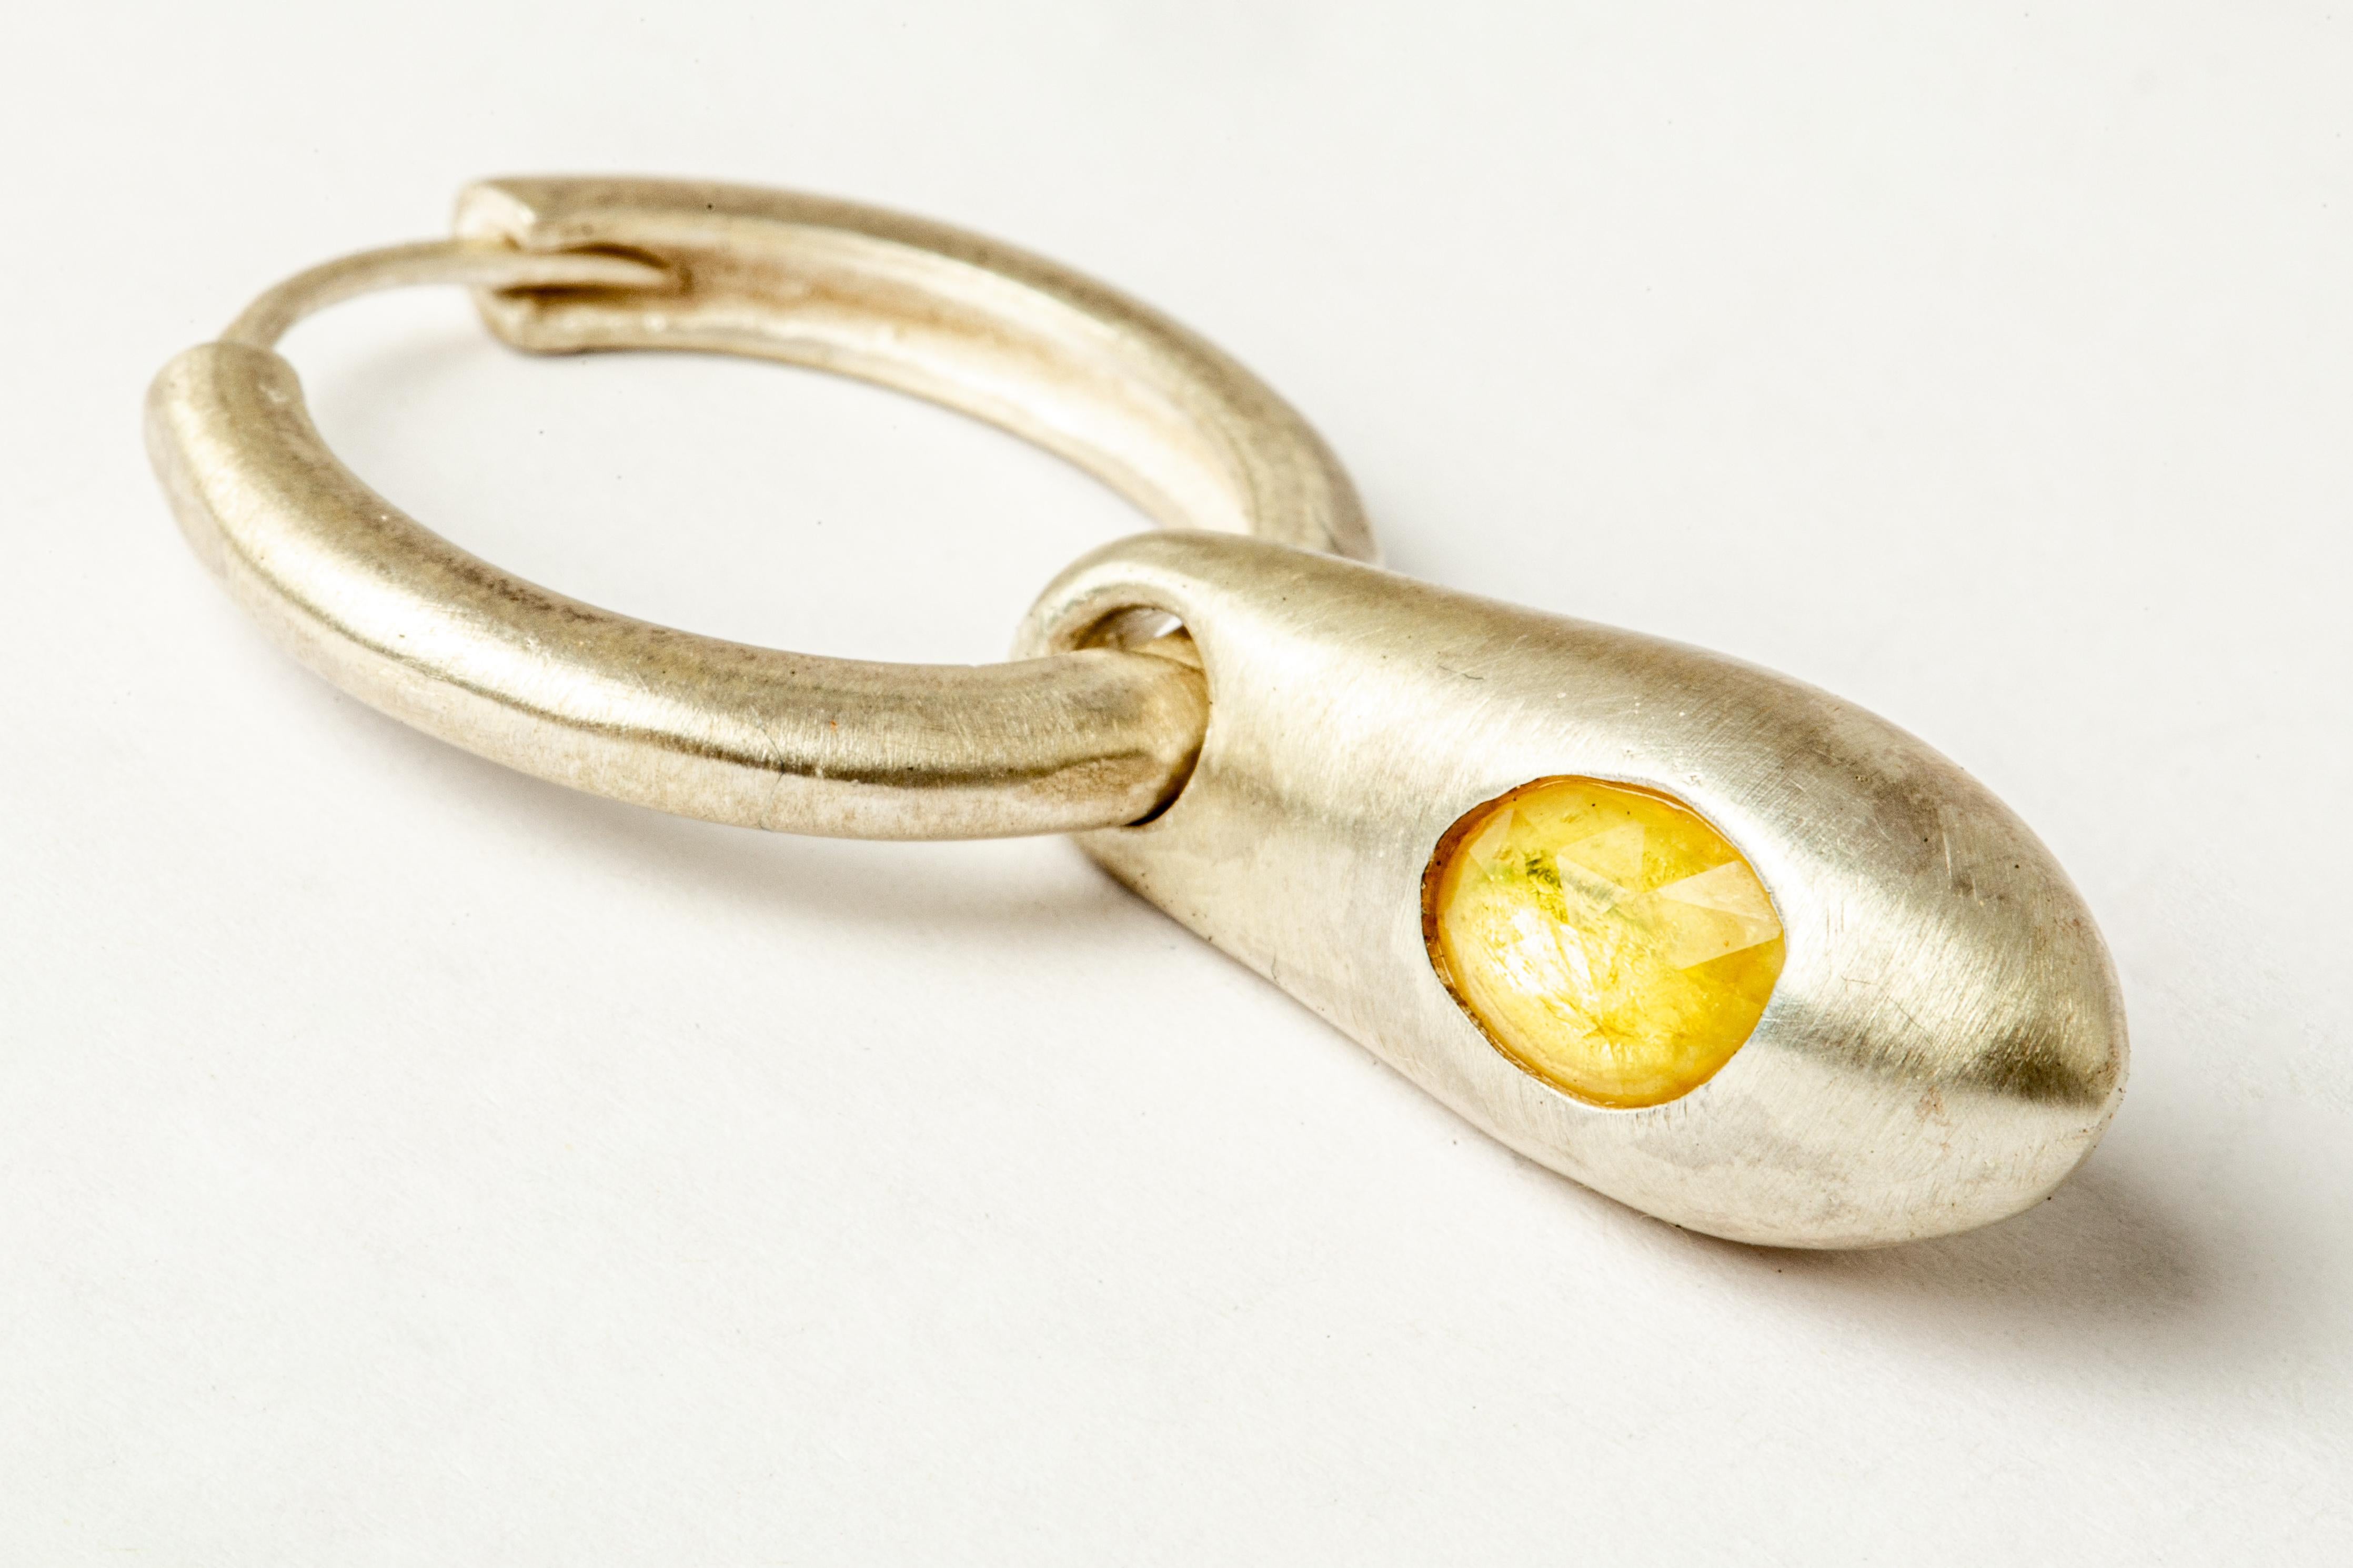 Earring in the shape of a chrysalis in matte sterling silver with a slab of yellow sapphire. This item is made with a naturally occurring element and will vary from the photograph you see. Each piece is unique and this is what makes it special.
Sold